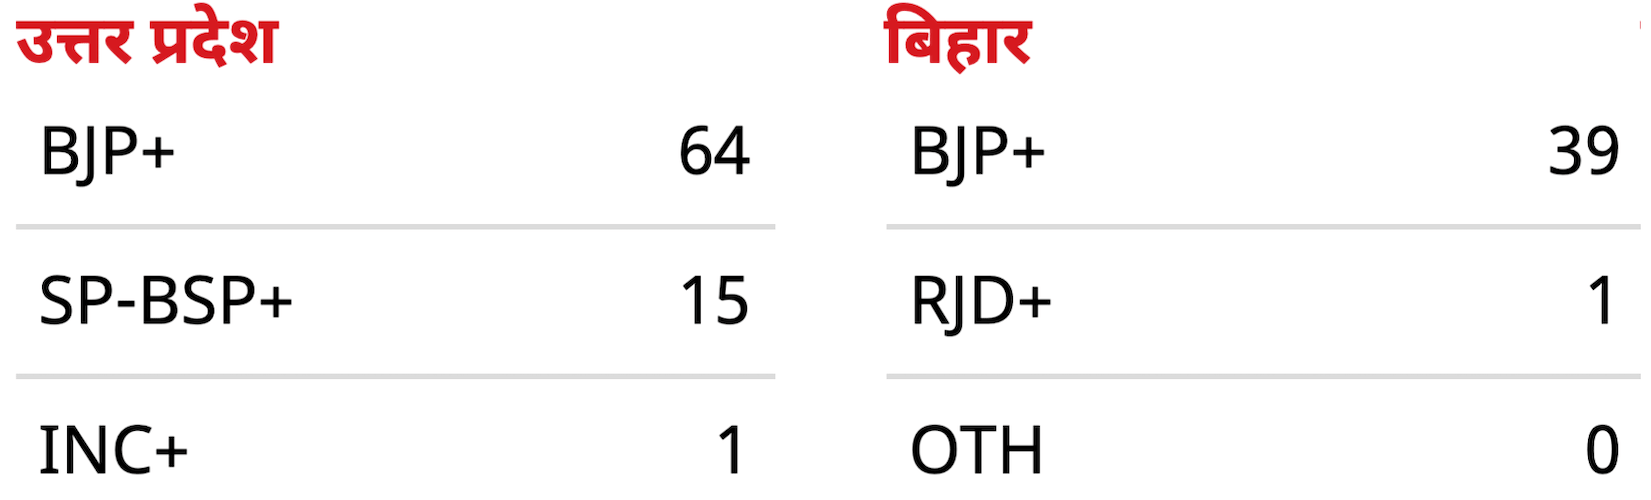 2019-loksabah-election-results-record-victory-of-modi-bjp-overthrew-congress-and-other-regional-parties